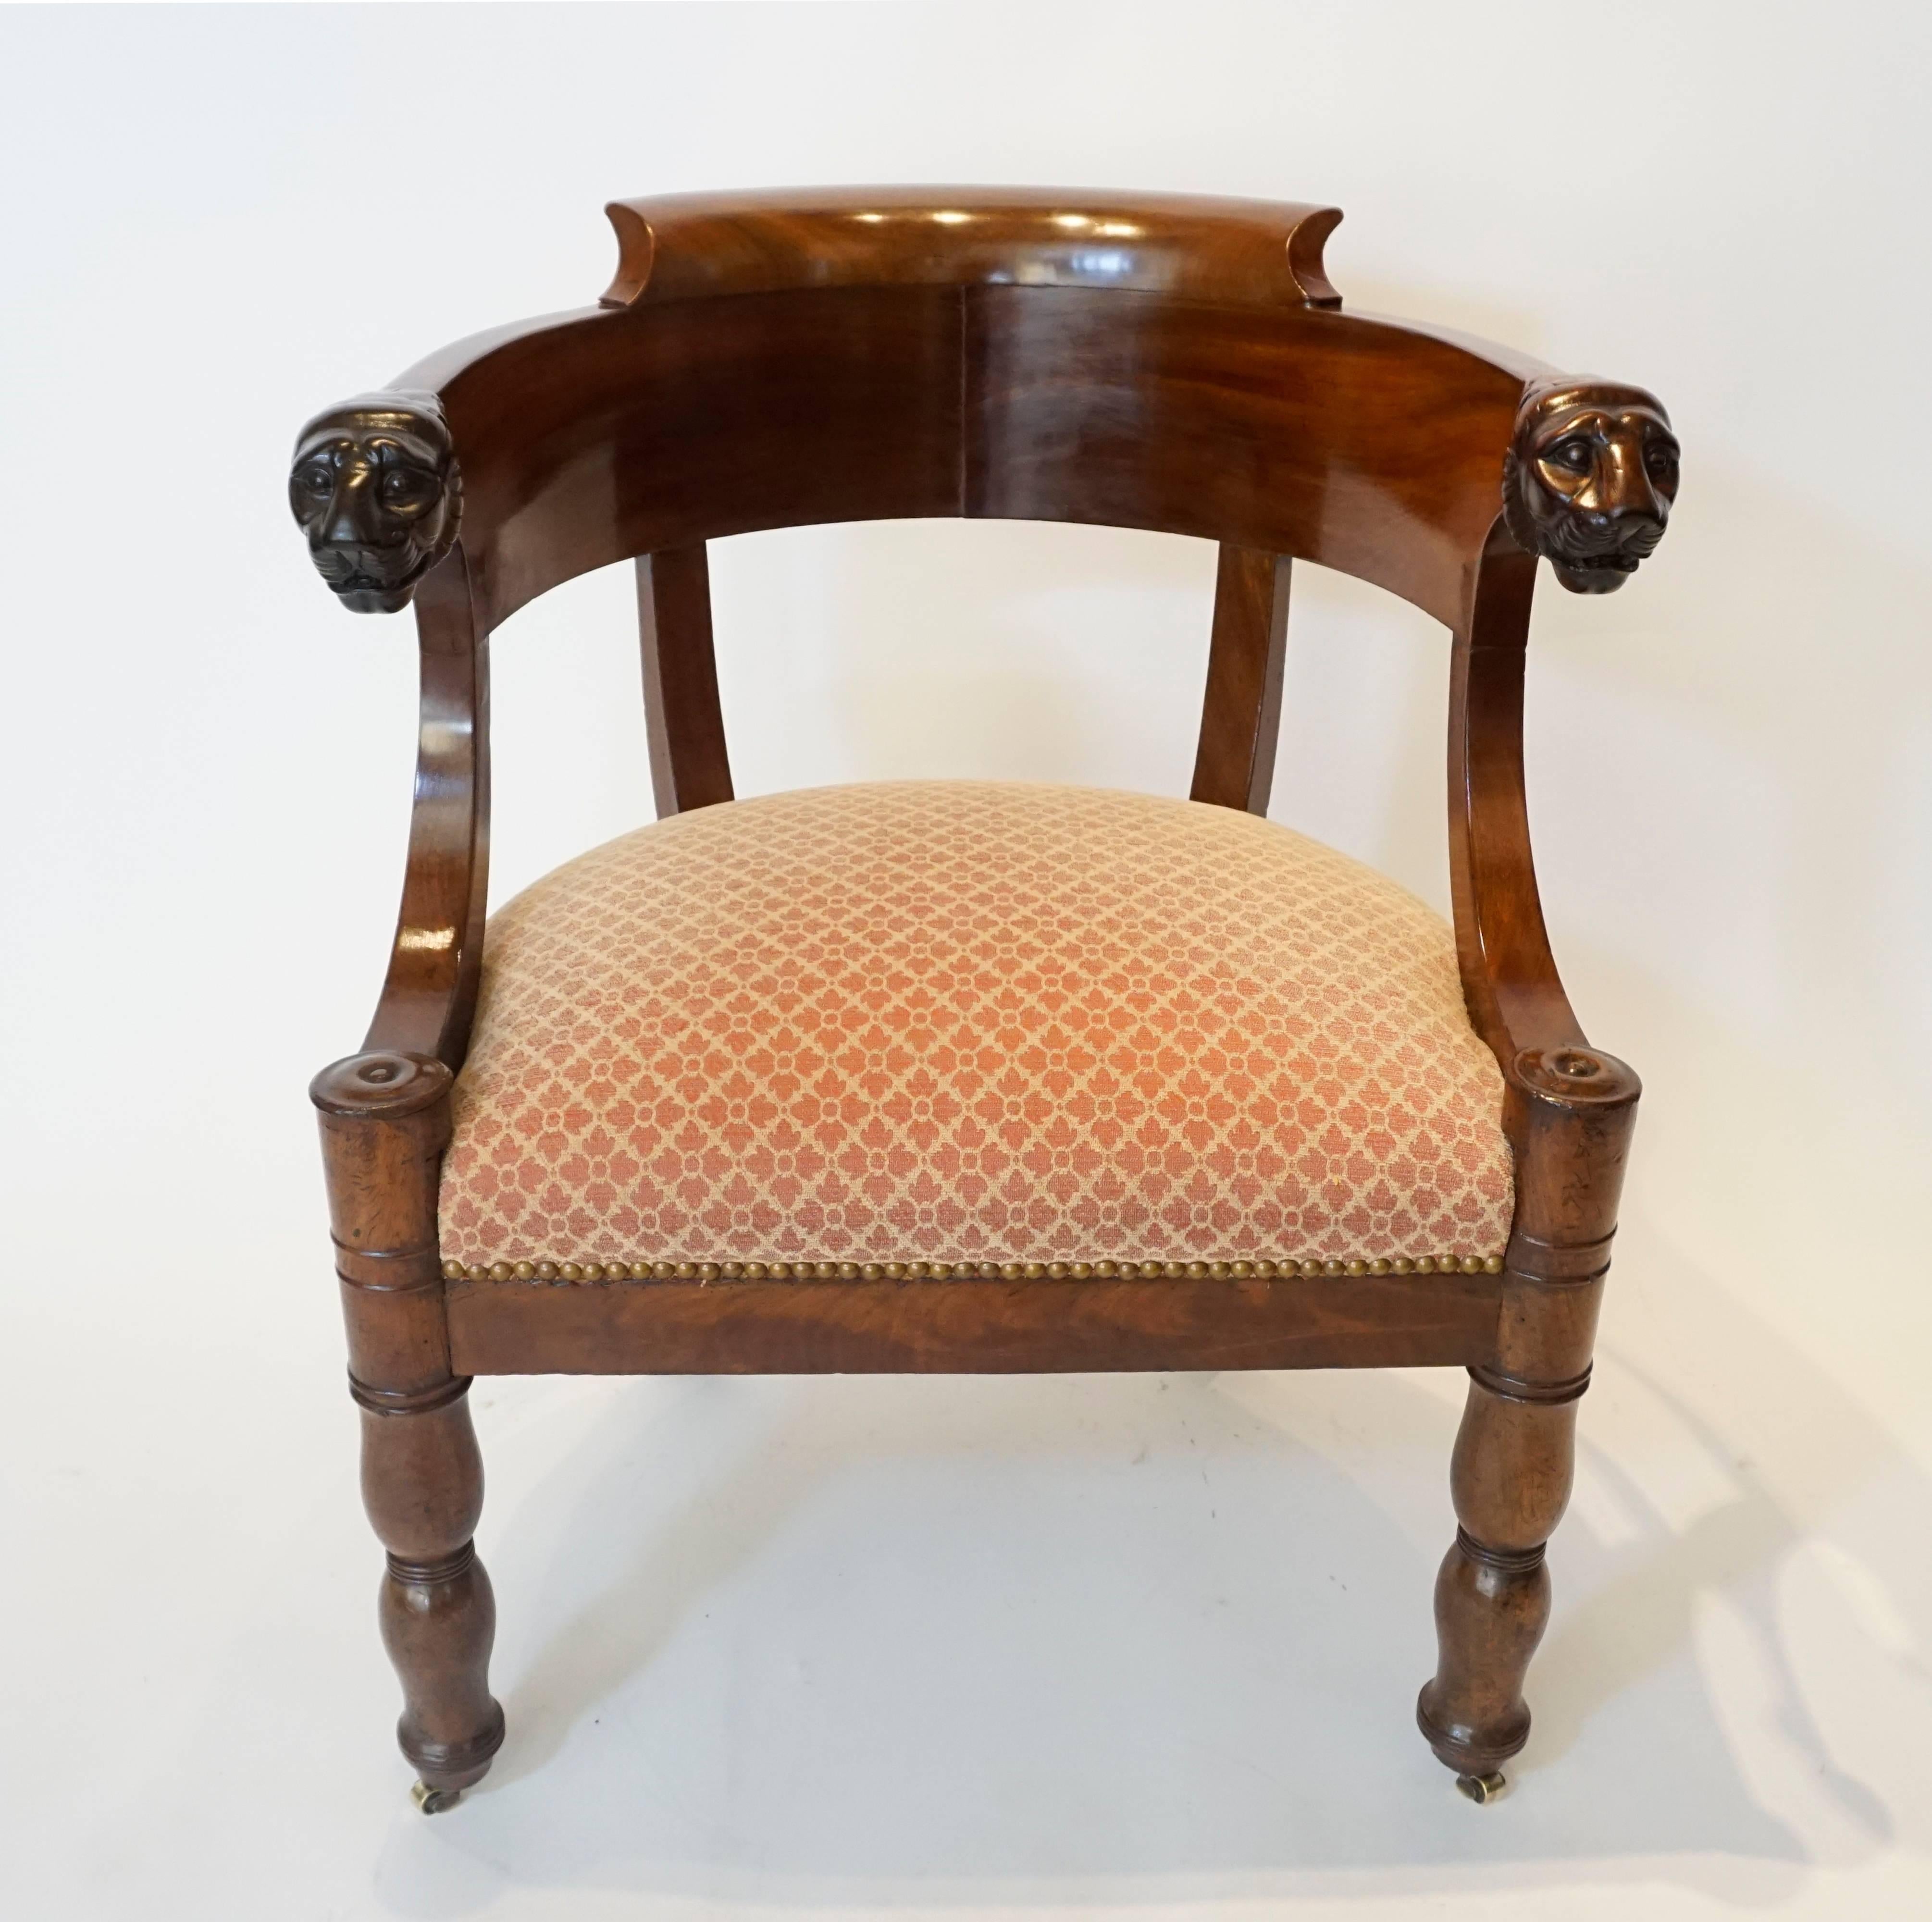 An elegant French Empire, circa 1810, fauteuil de bureau, or desk chair, having carved mahogany frame with continous deeply curved klismos-influenced backrest terminating into finely carved lion-muzzles; swept arm supports joining round turned front